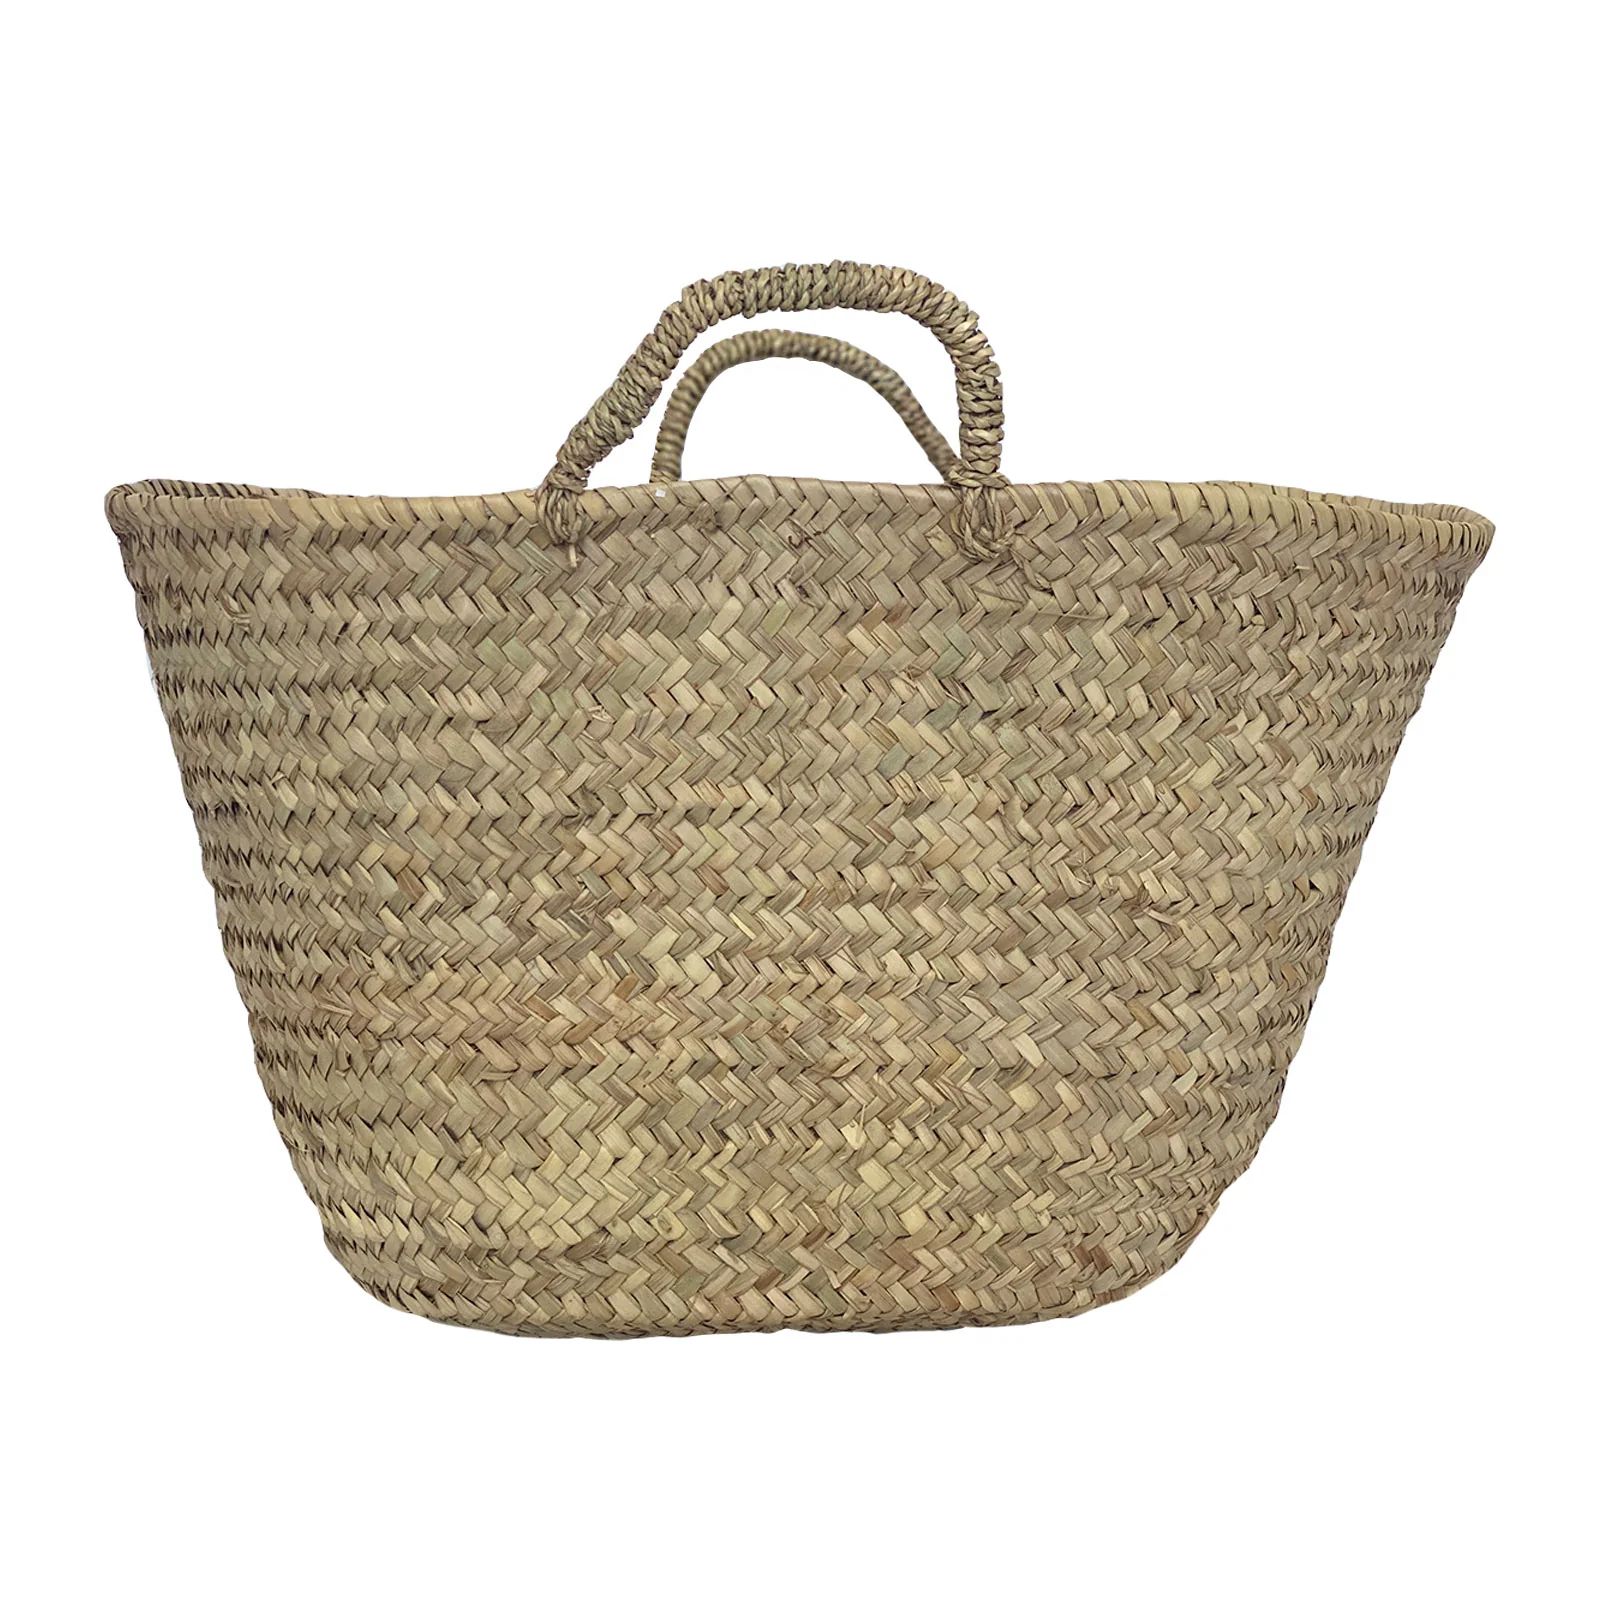 Basket Tote with Woven Handles | Brooke and Lou